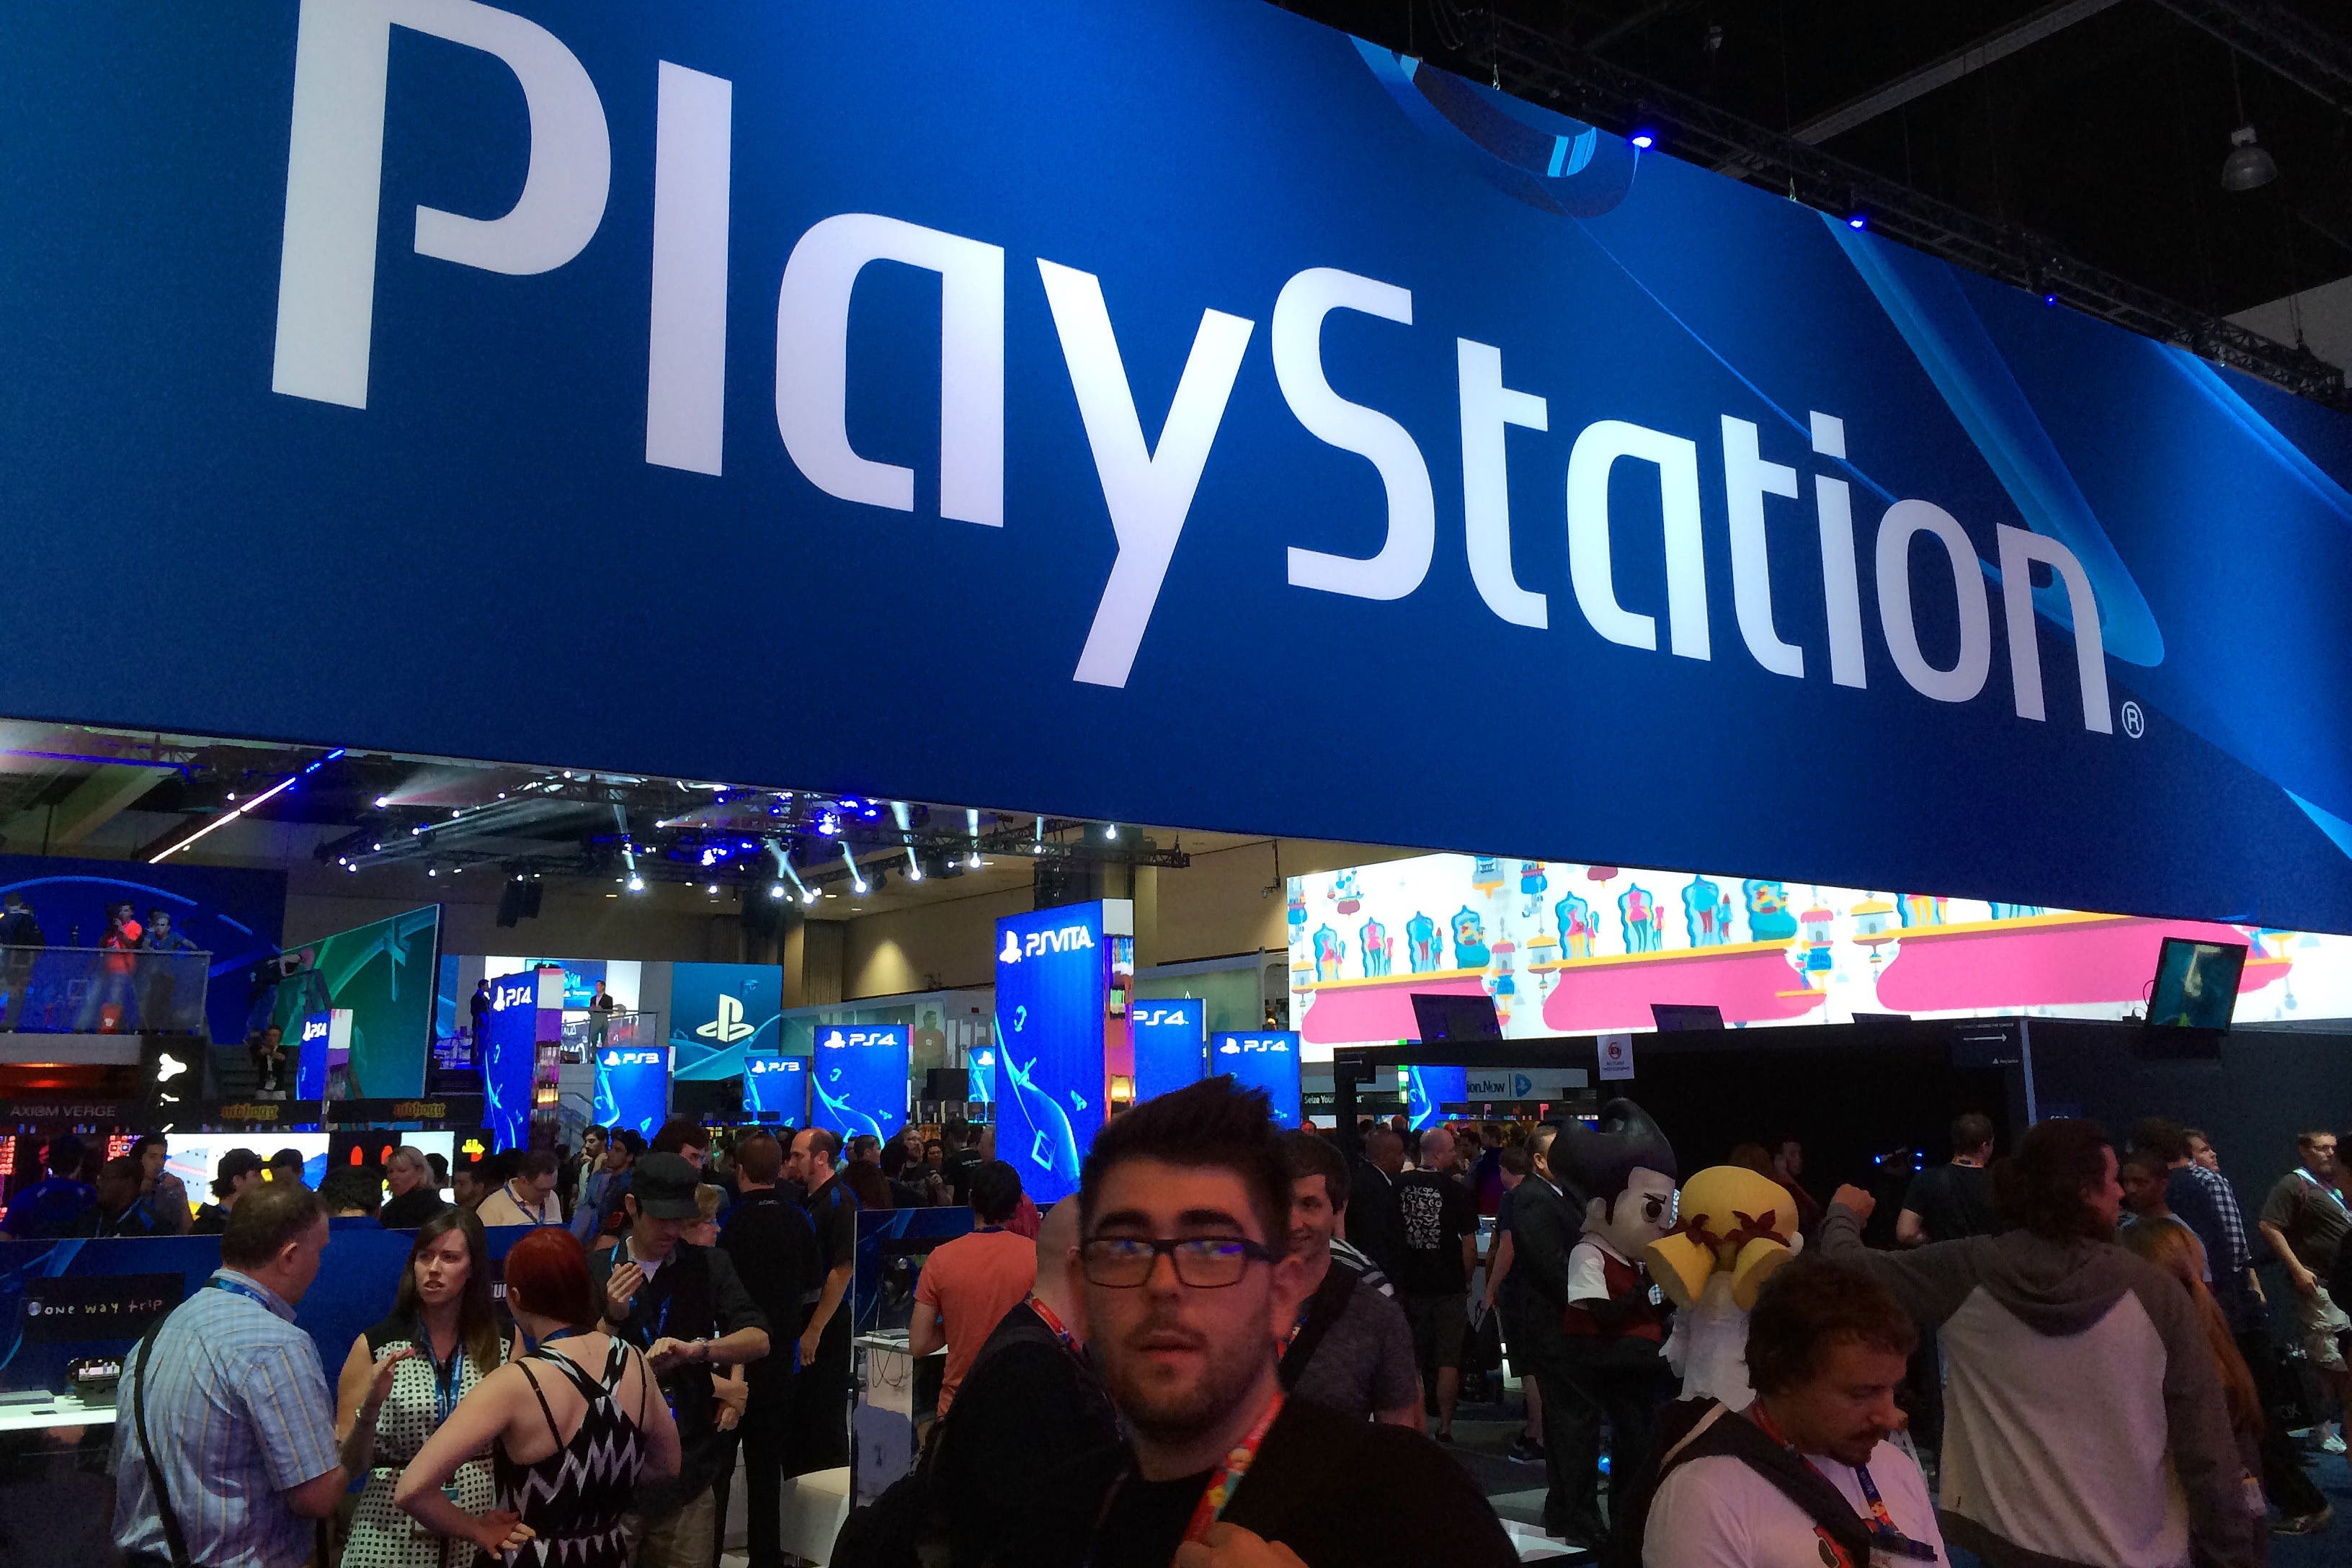 E3 Gaming Event Now Permanently Cancelled: Organisers